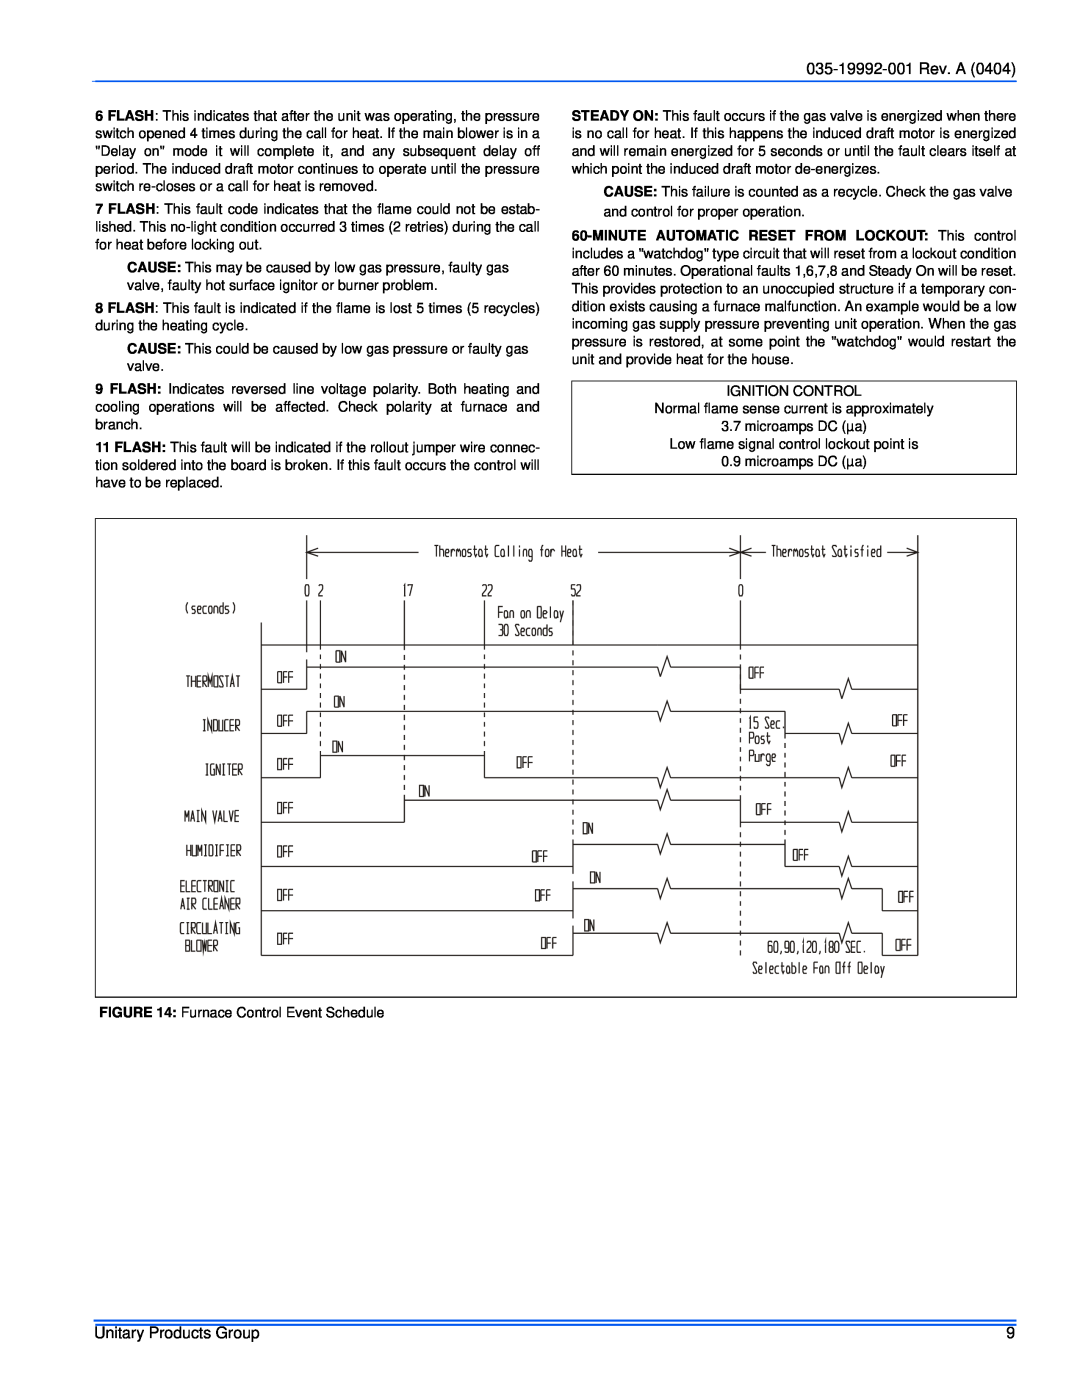 York G8C, GF8 service manual 035-19992-001Rev. A, Unitary Products Group 